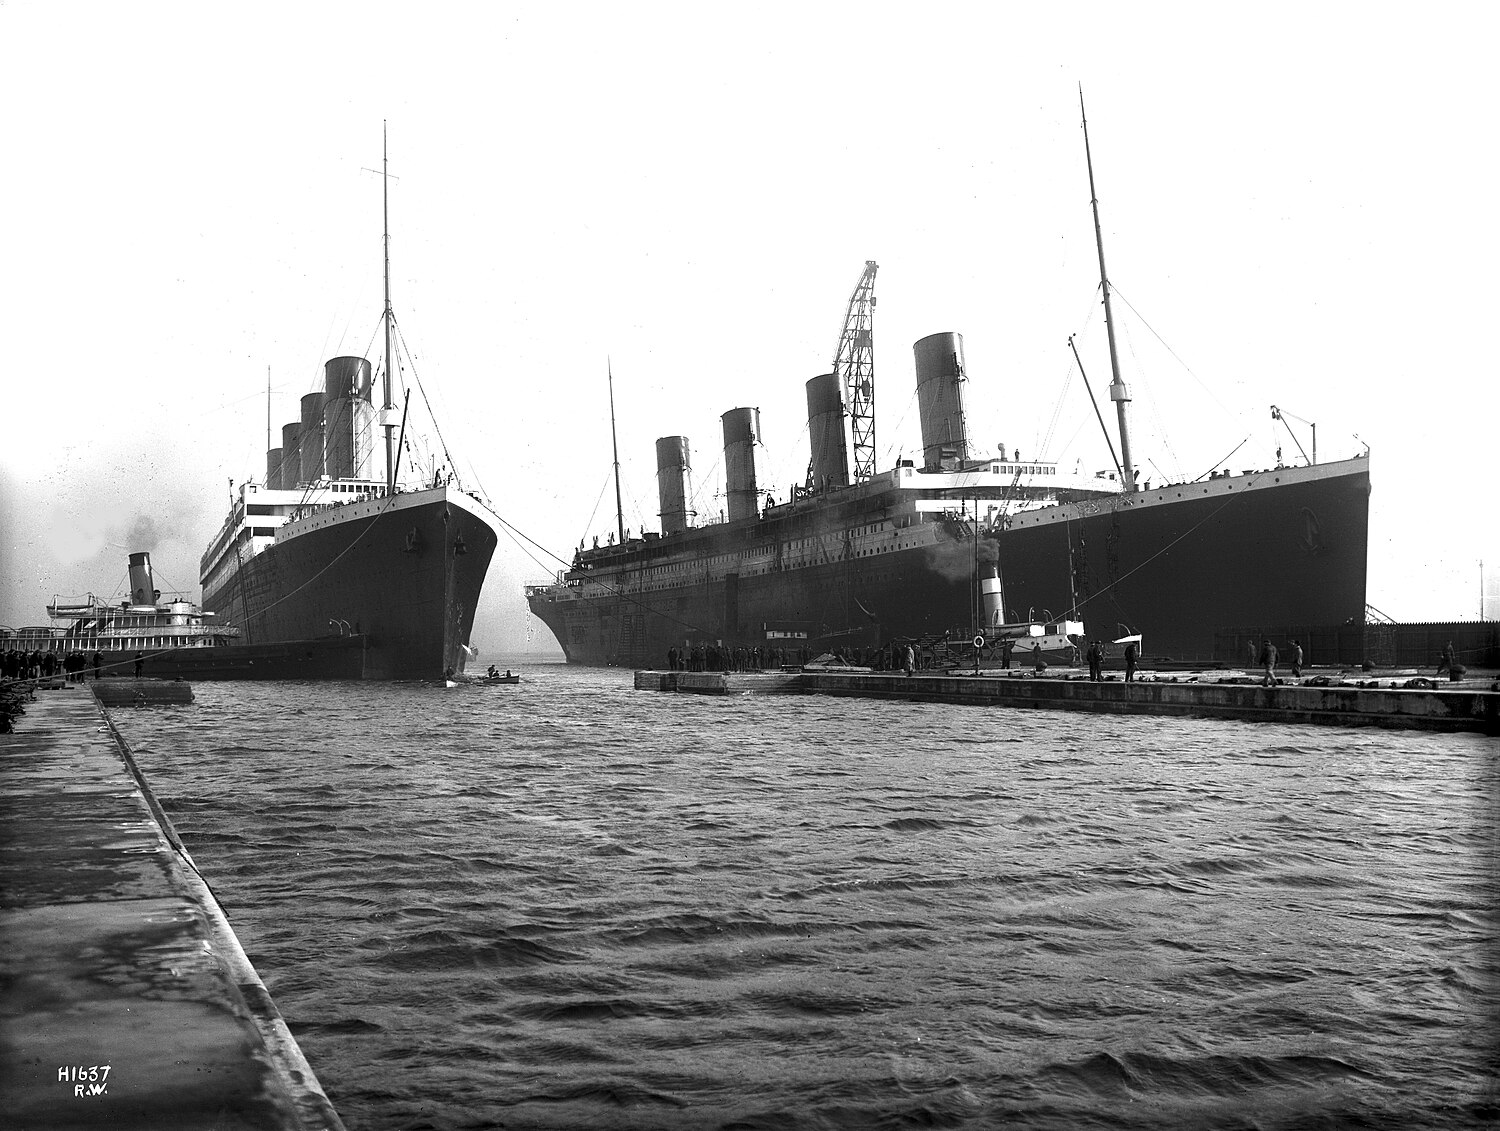 First Class Staterooms, Titanic Wiki